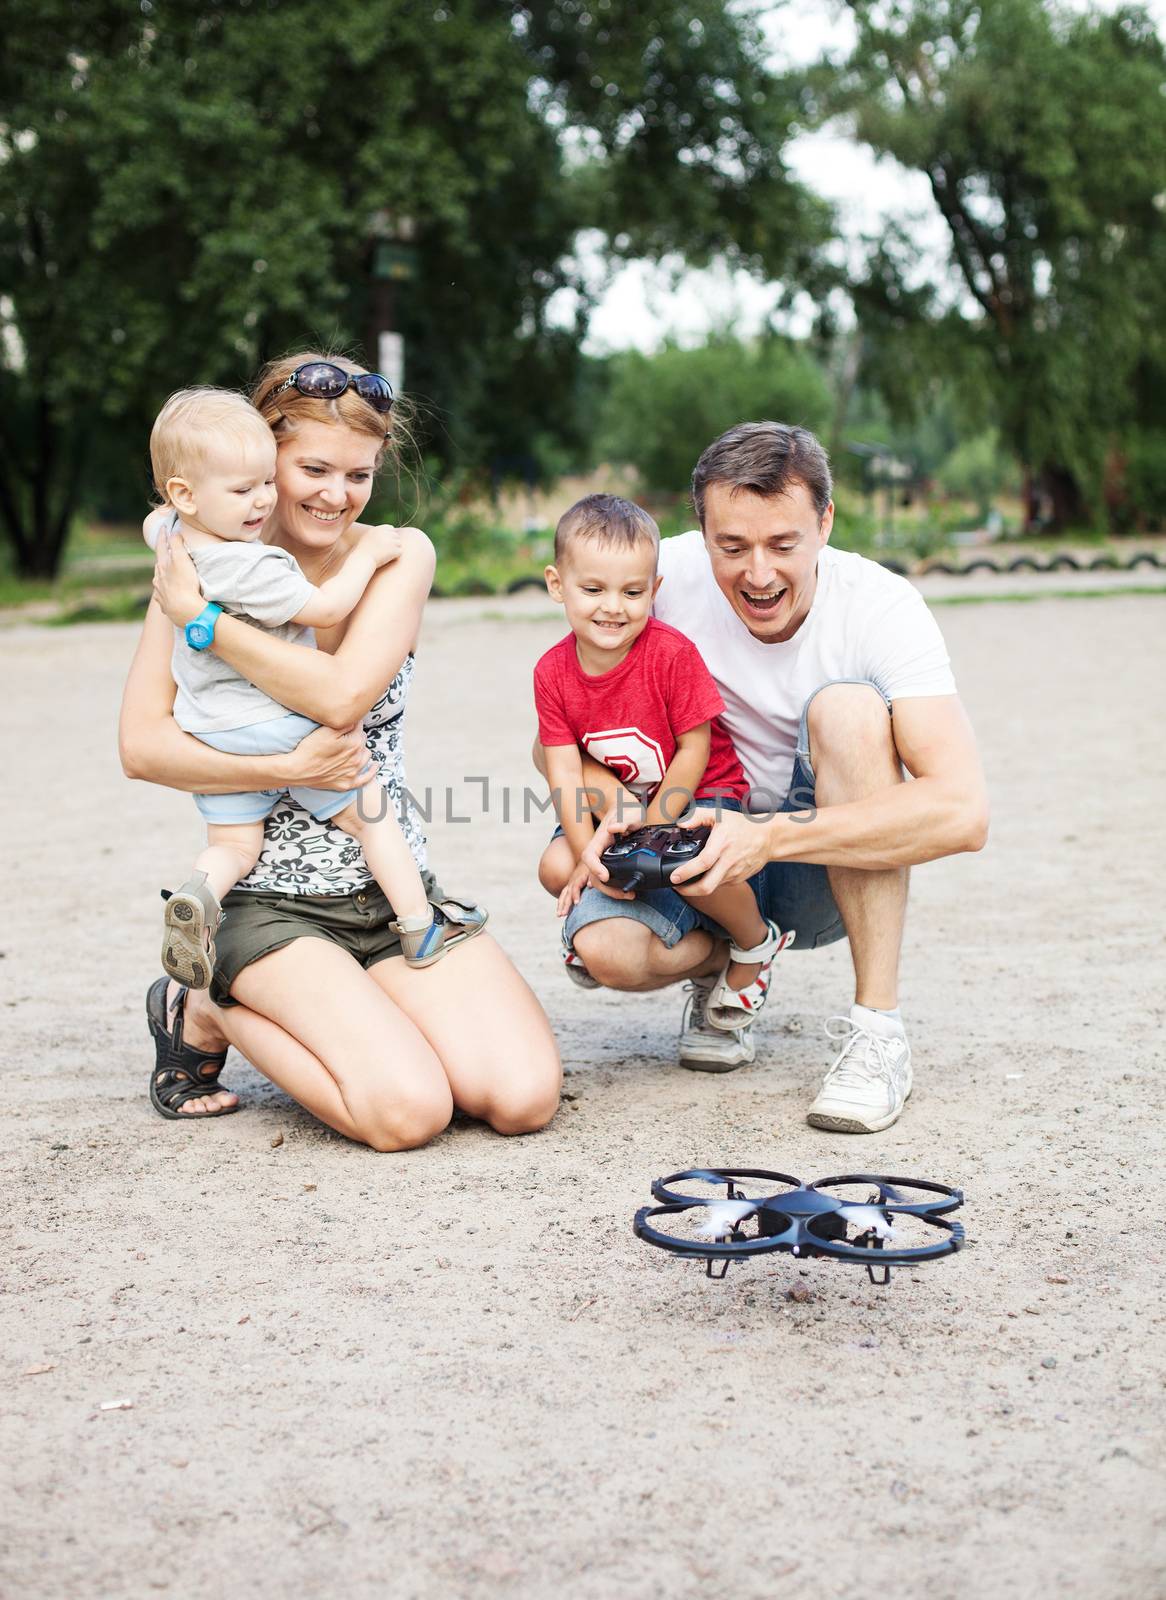 Young family with two boys playing with RC toy by photobac